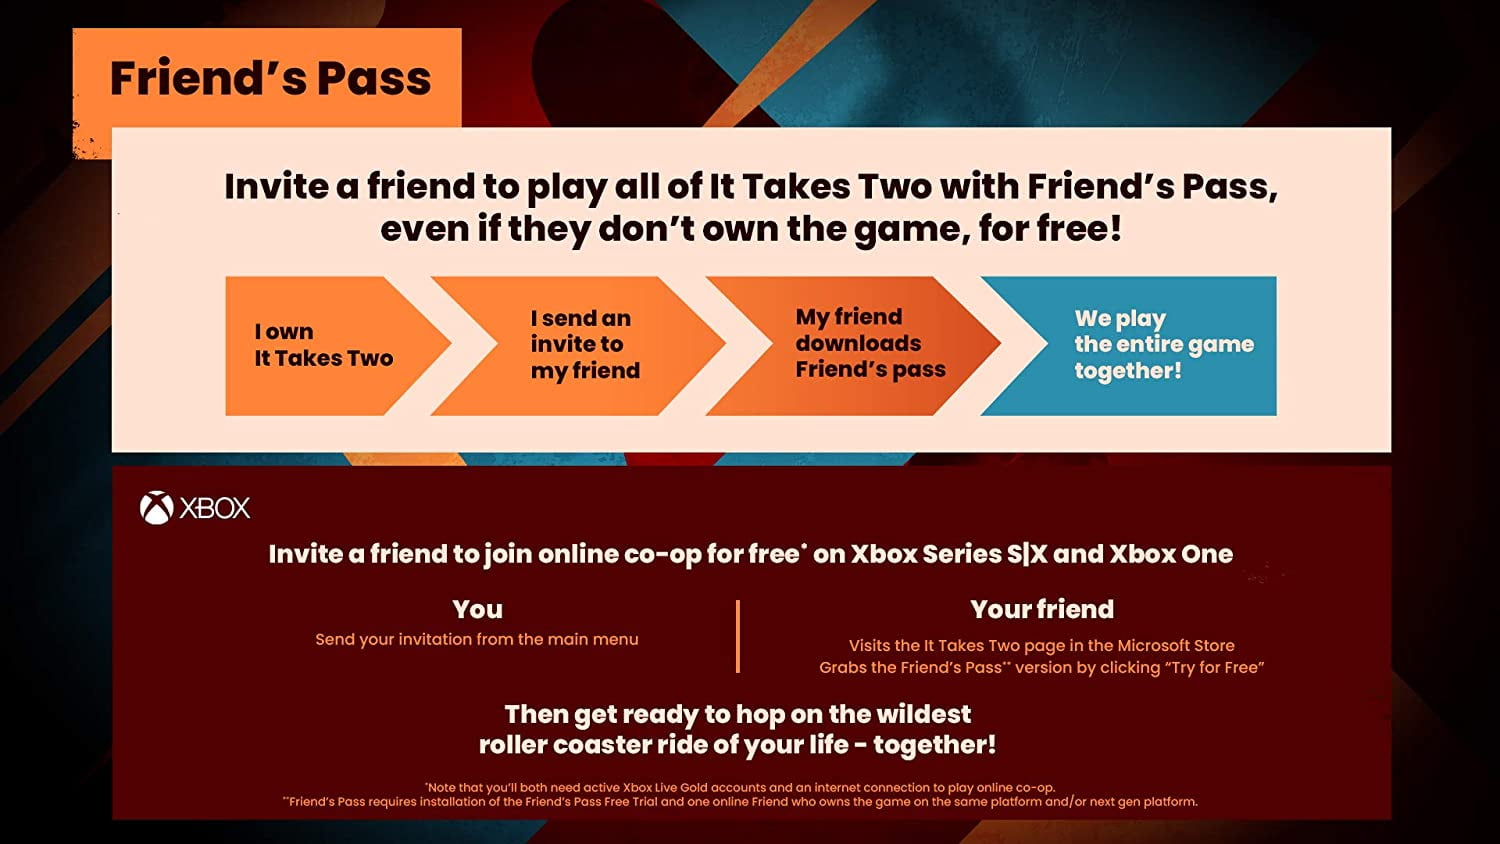 How to Get It Takes Two Friend's Pass on Nintendo Switch™